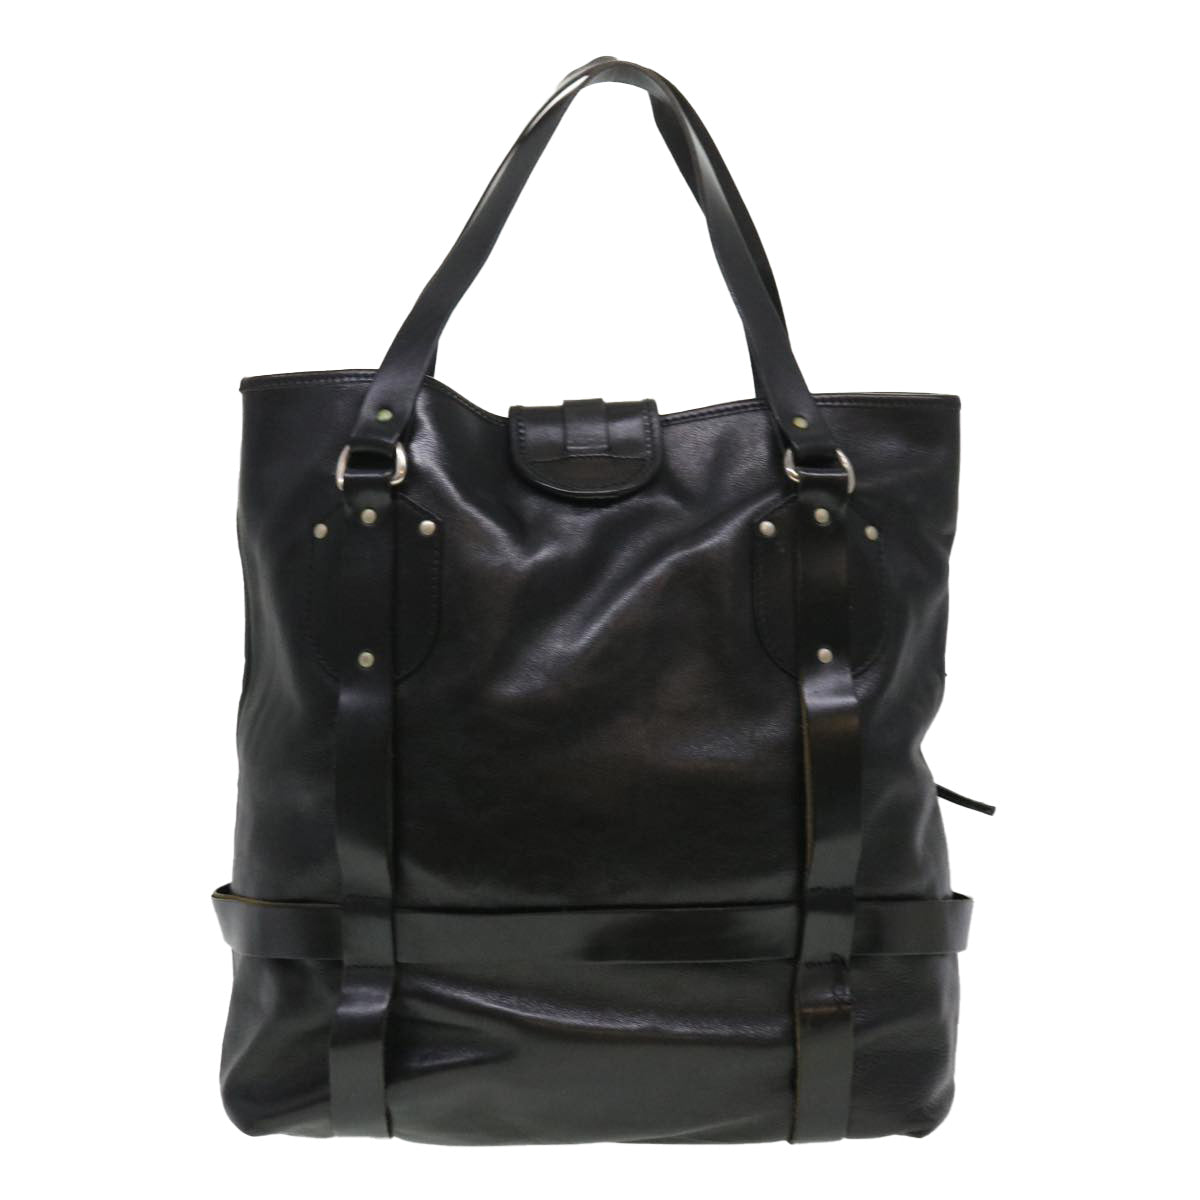 Chloe Tote Bag Leather Black Auth bs4744 - 0